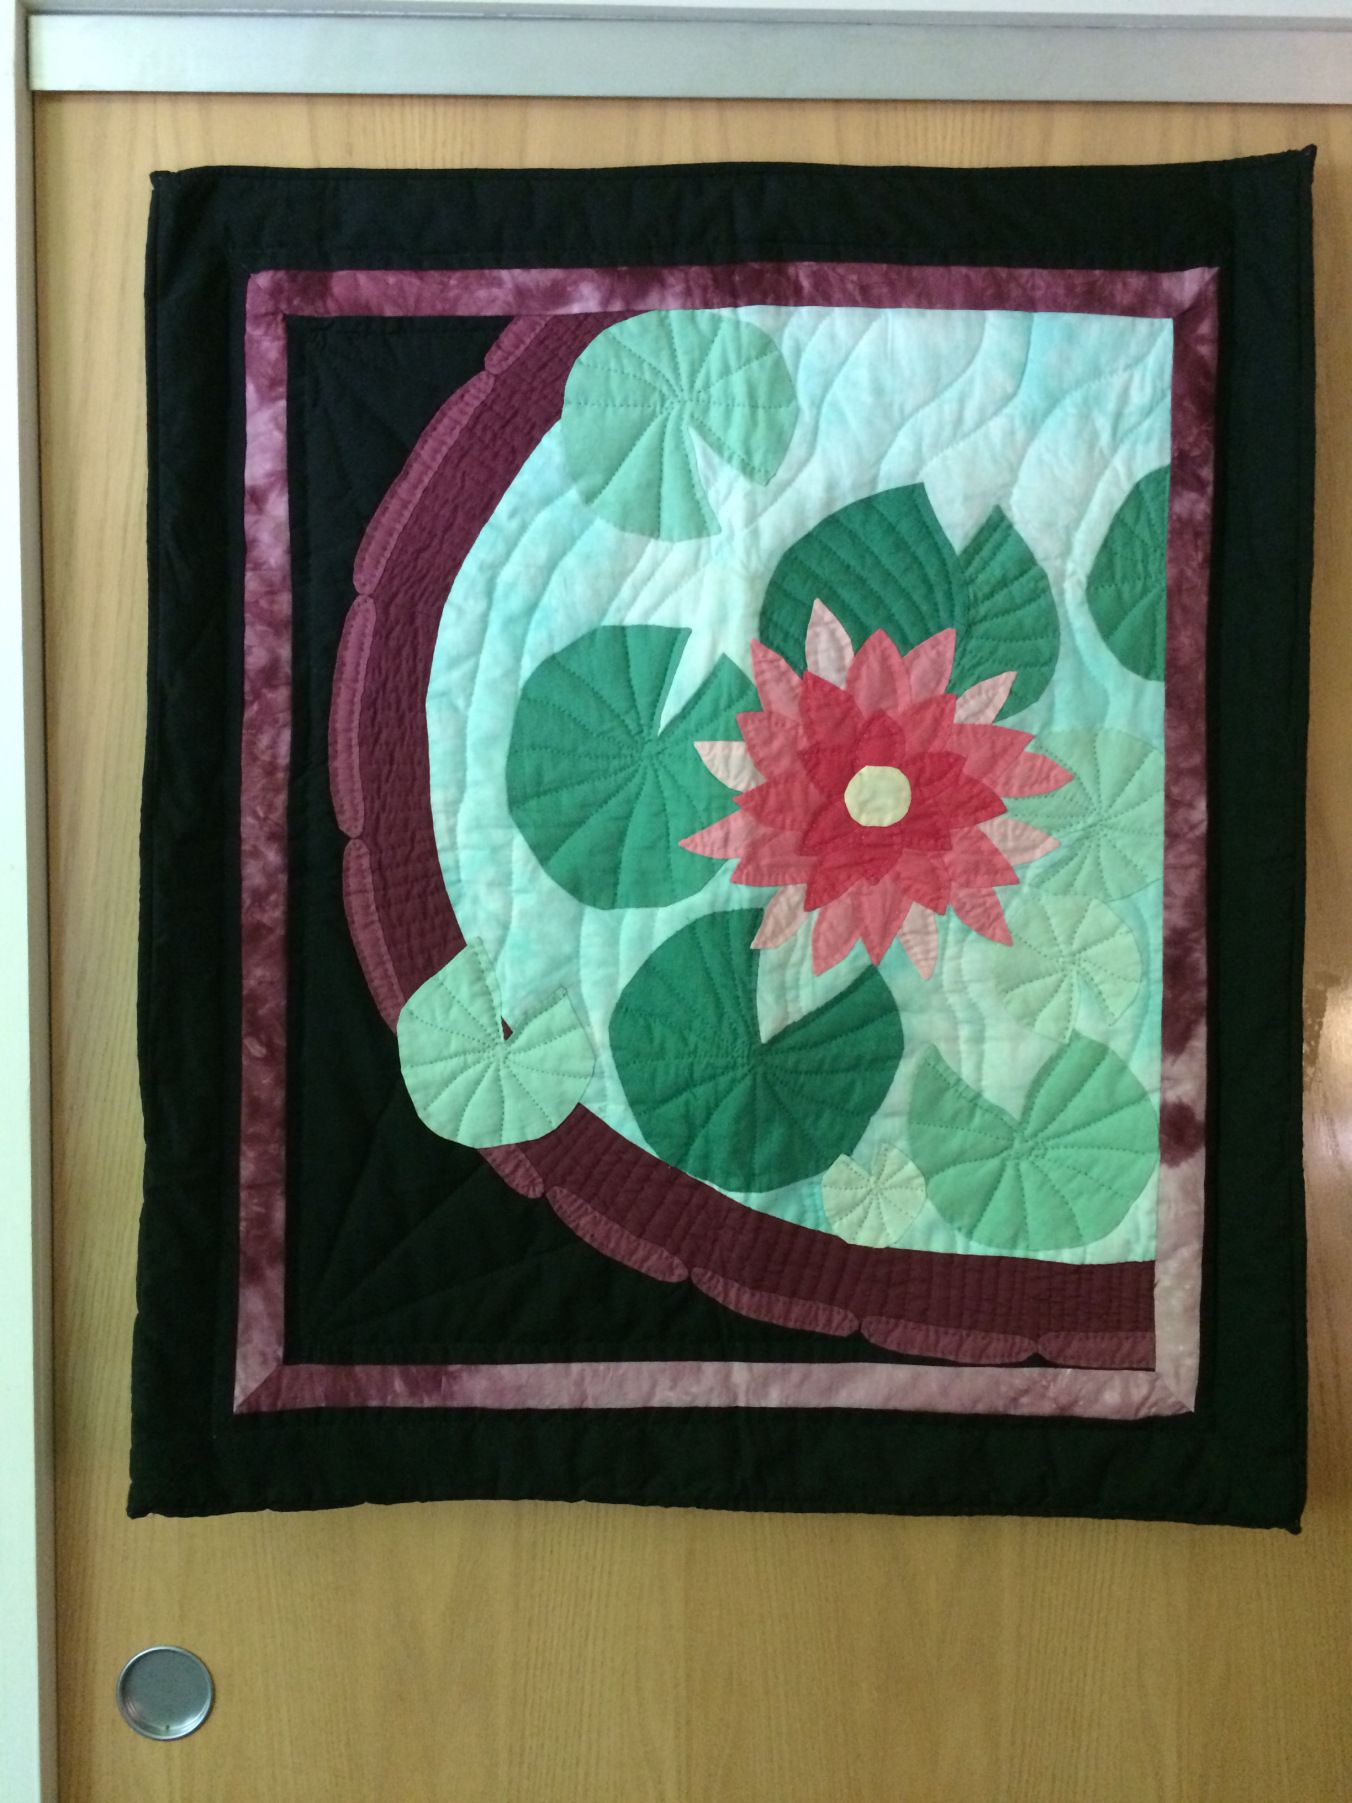 How To Hang A Quilt With Command Strips